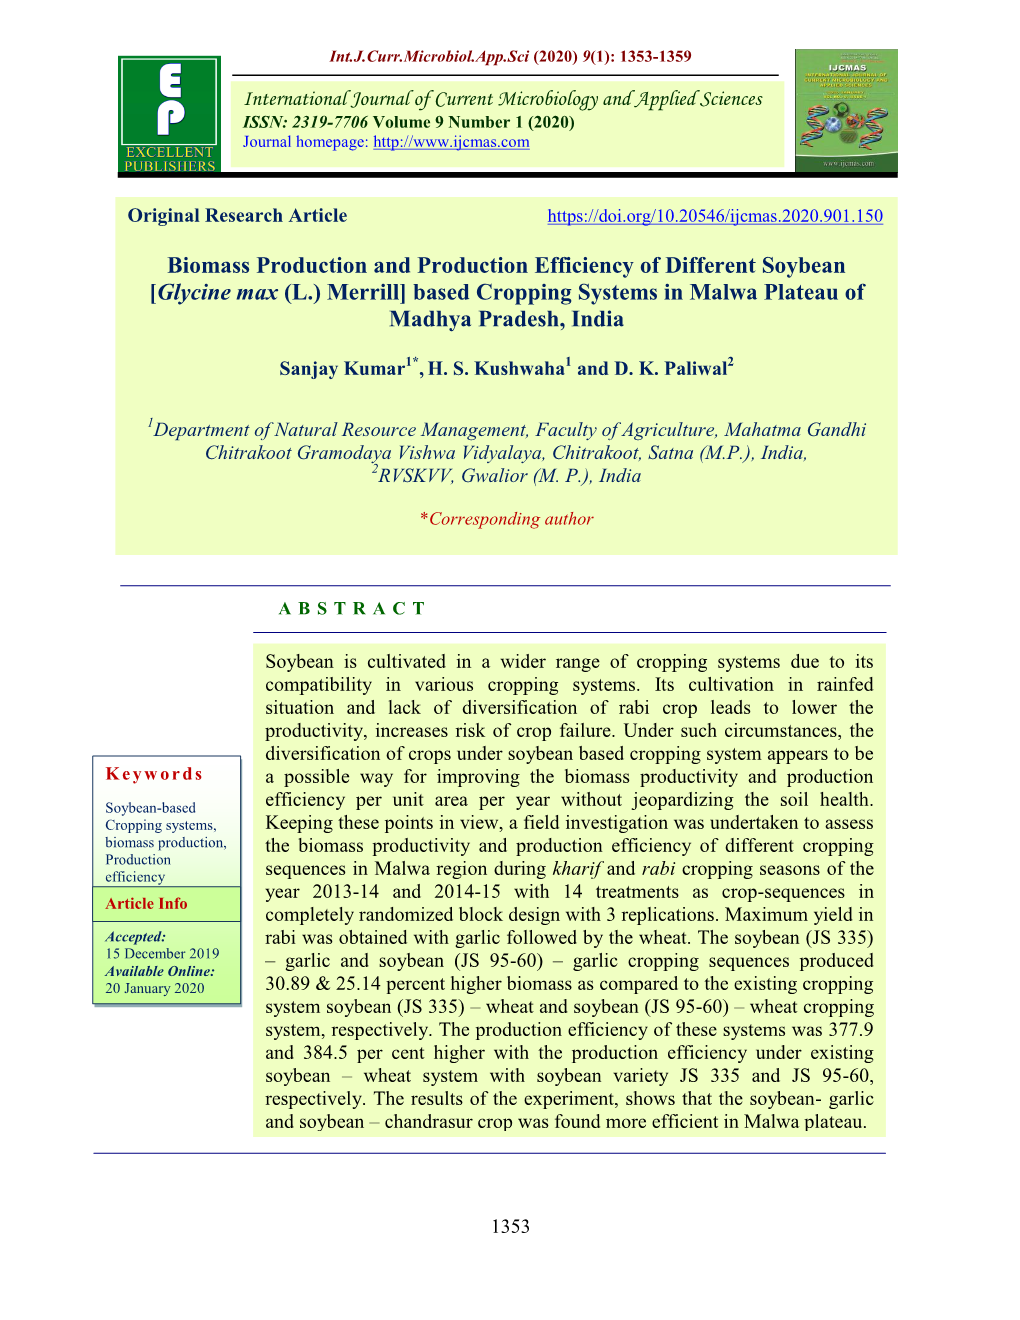 Biomass Production and Production Efficiency of Different Soybean [Glycine Max (L.) Merrill] Based Cropping Systems in Malwa Plateau of Madhya Pradesh, India